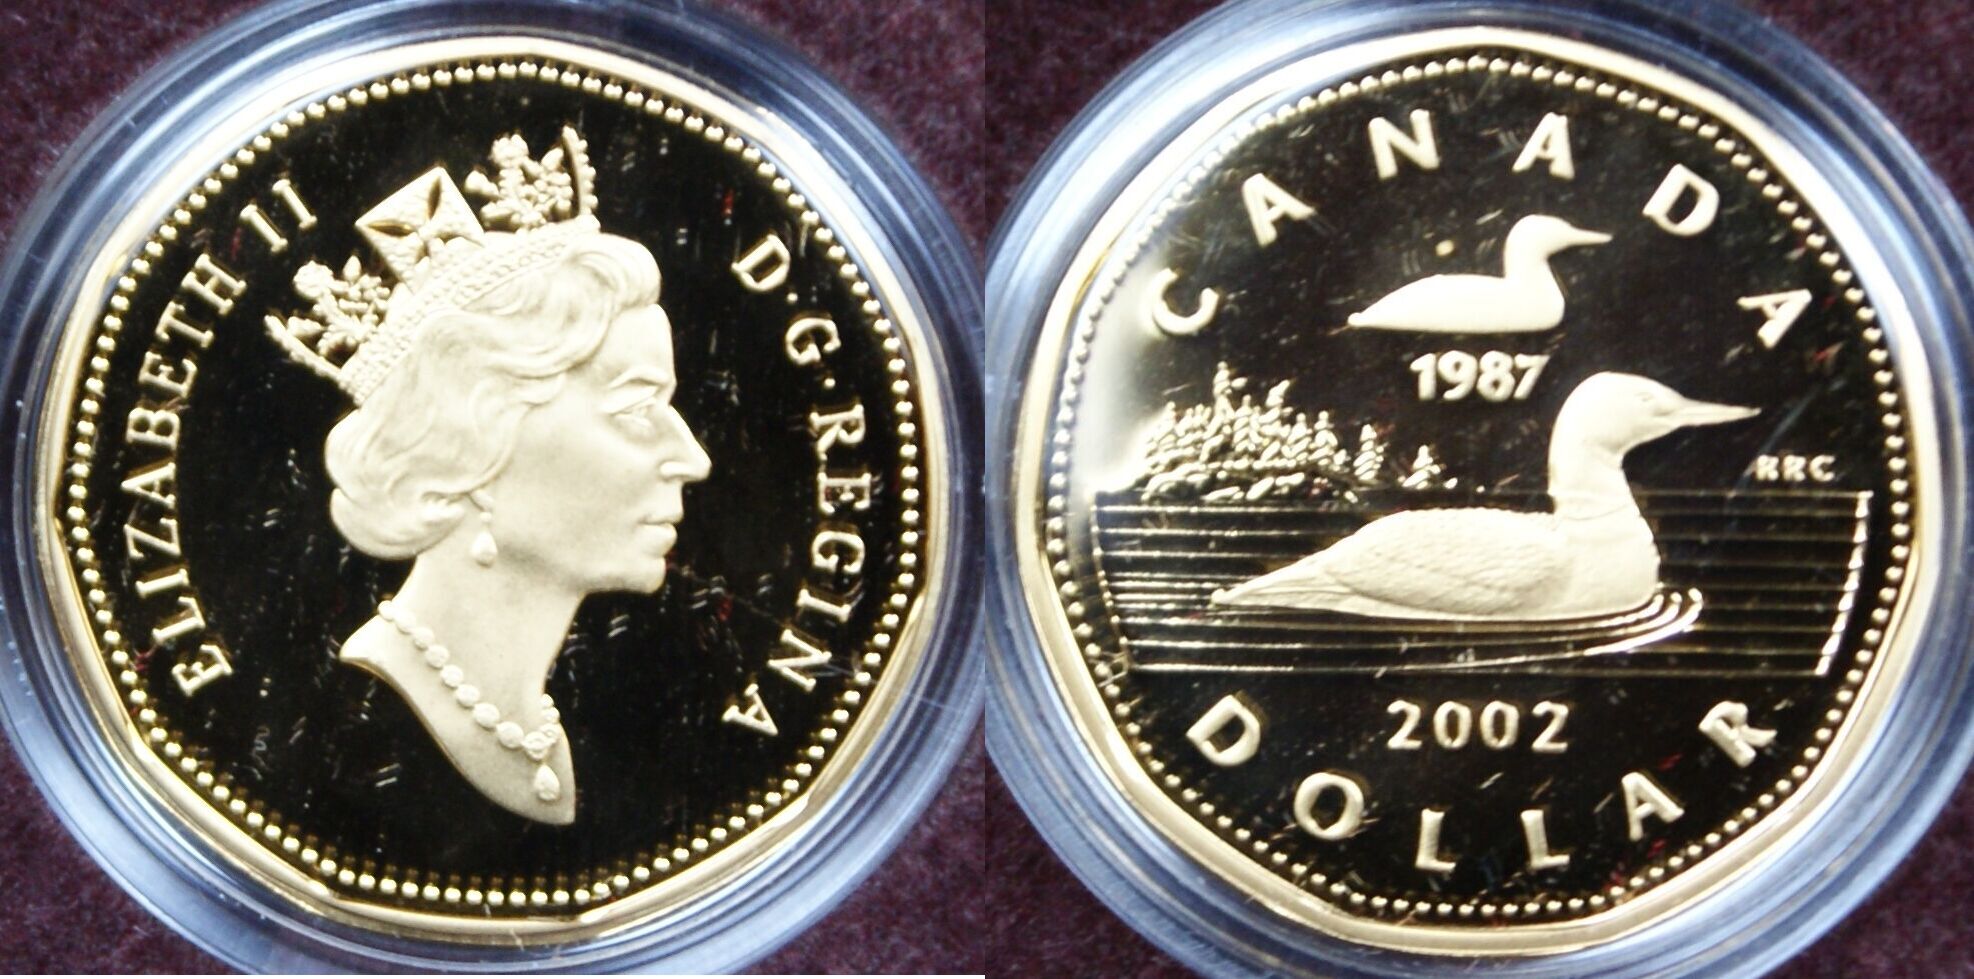 Details about   2002 Canada Gold Plated $1 Coin Commemorative Loonie Album w/Stamps & Maclean's 